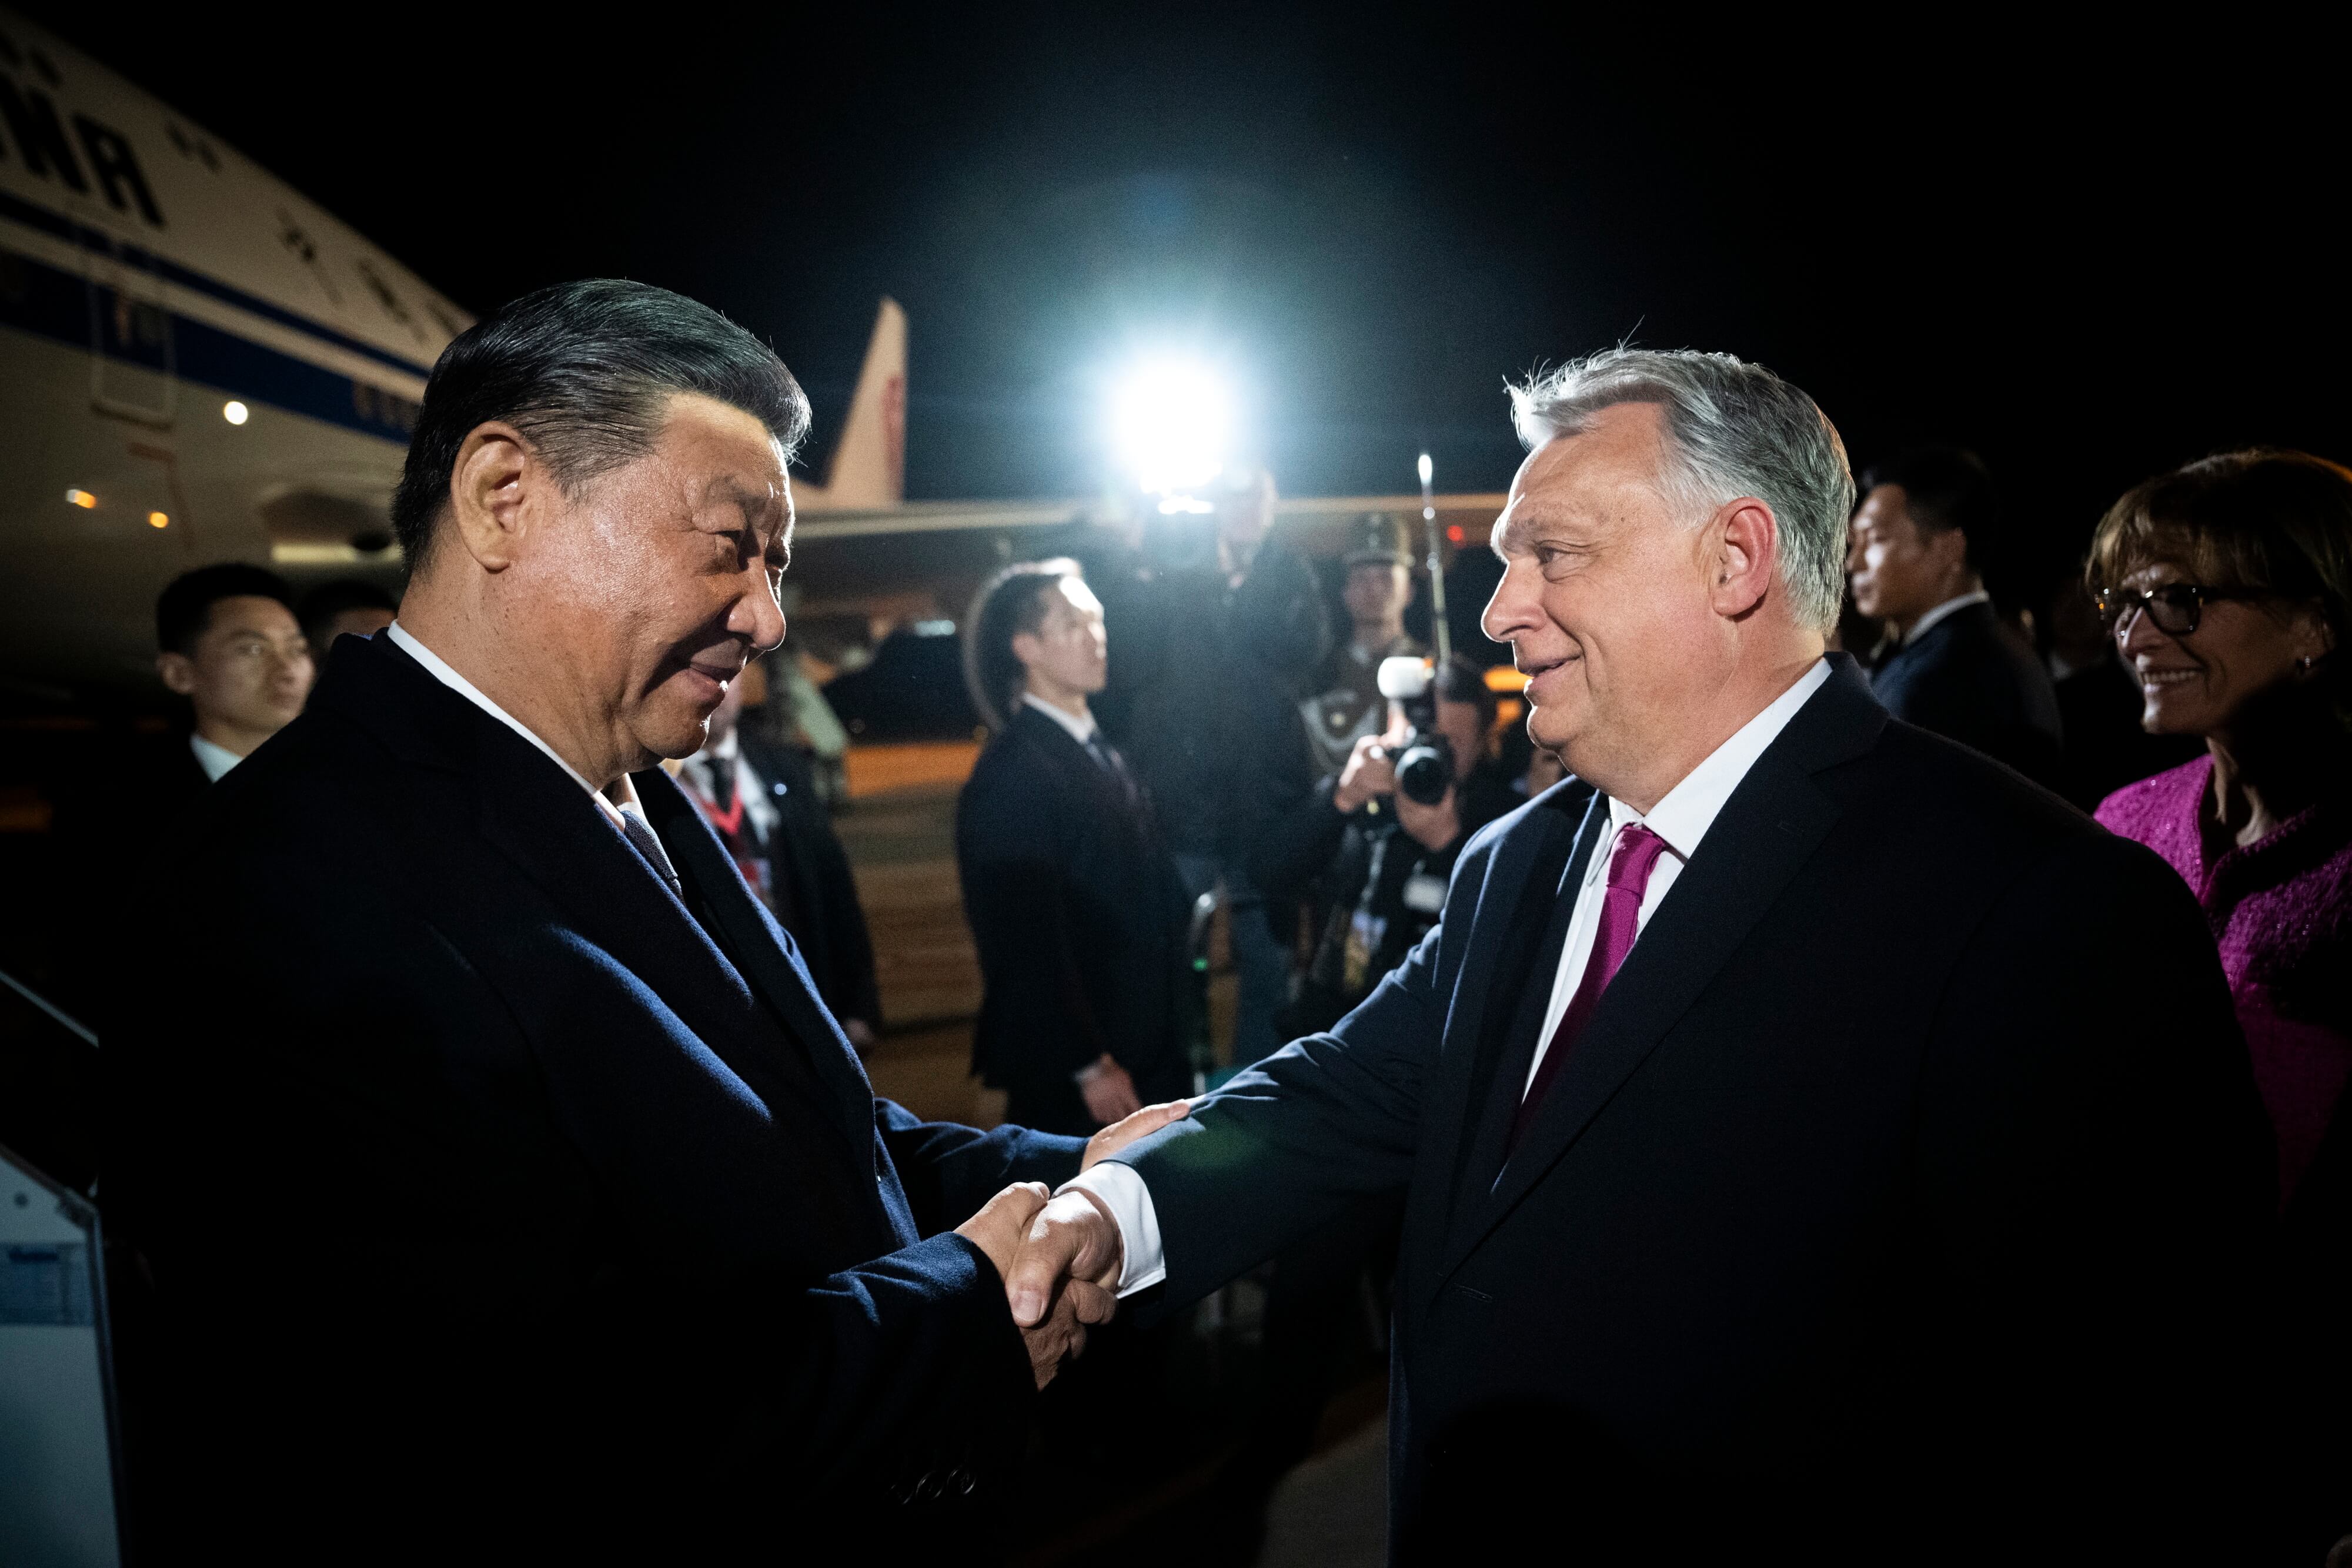 Chinese President's Visit Said to be Confirmation Of Hungary's 'Connectivity Strategy' - but What is That?